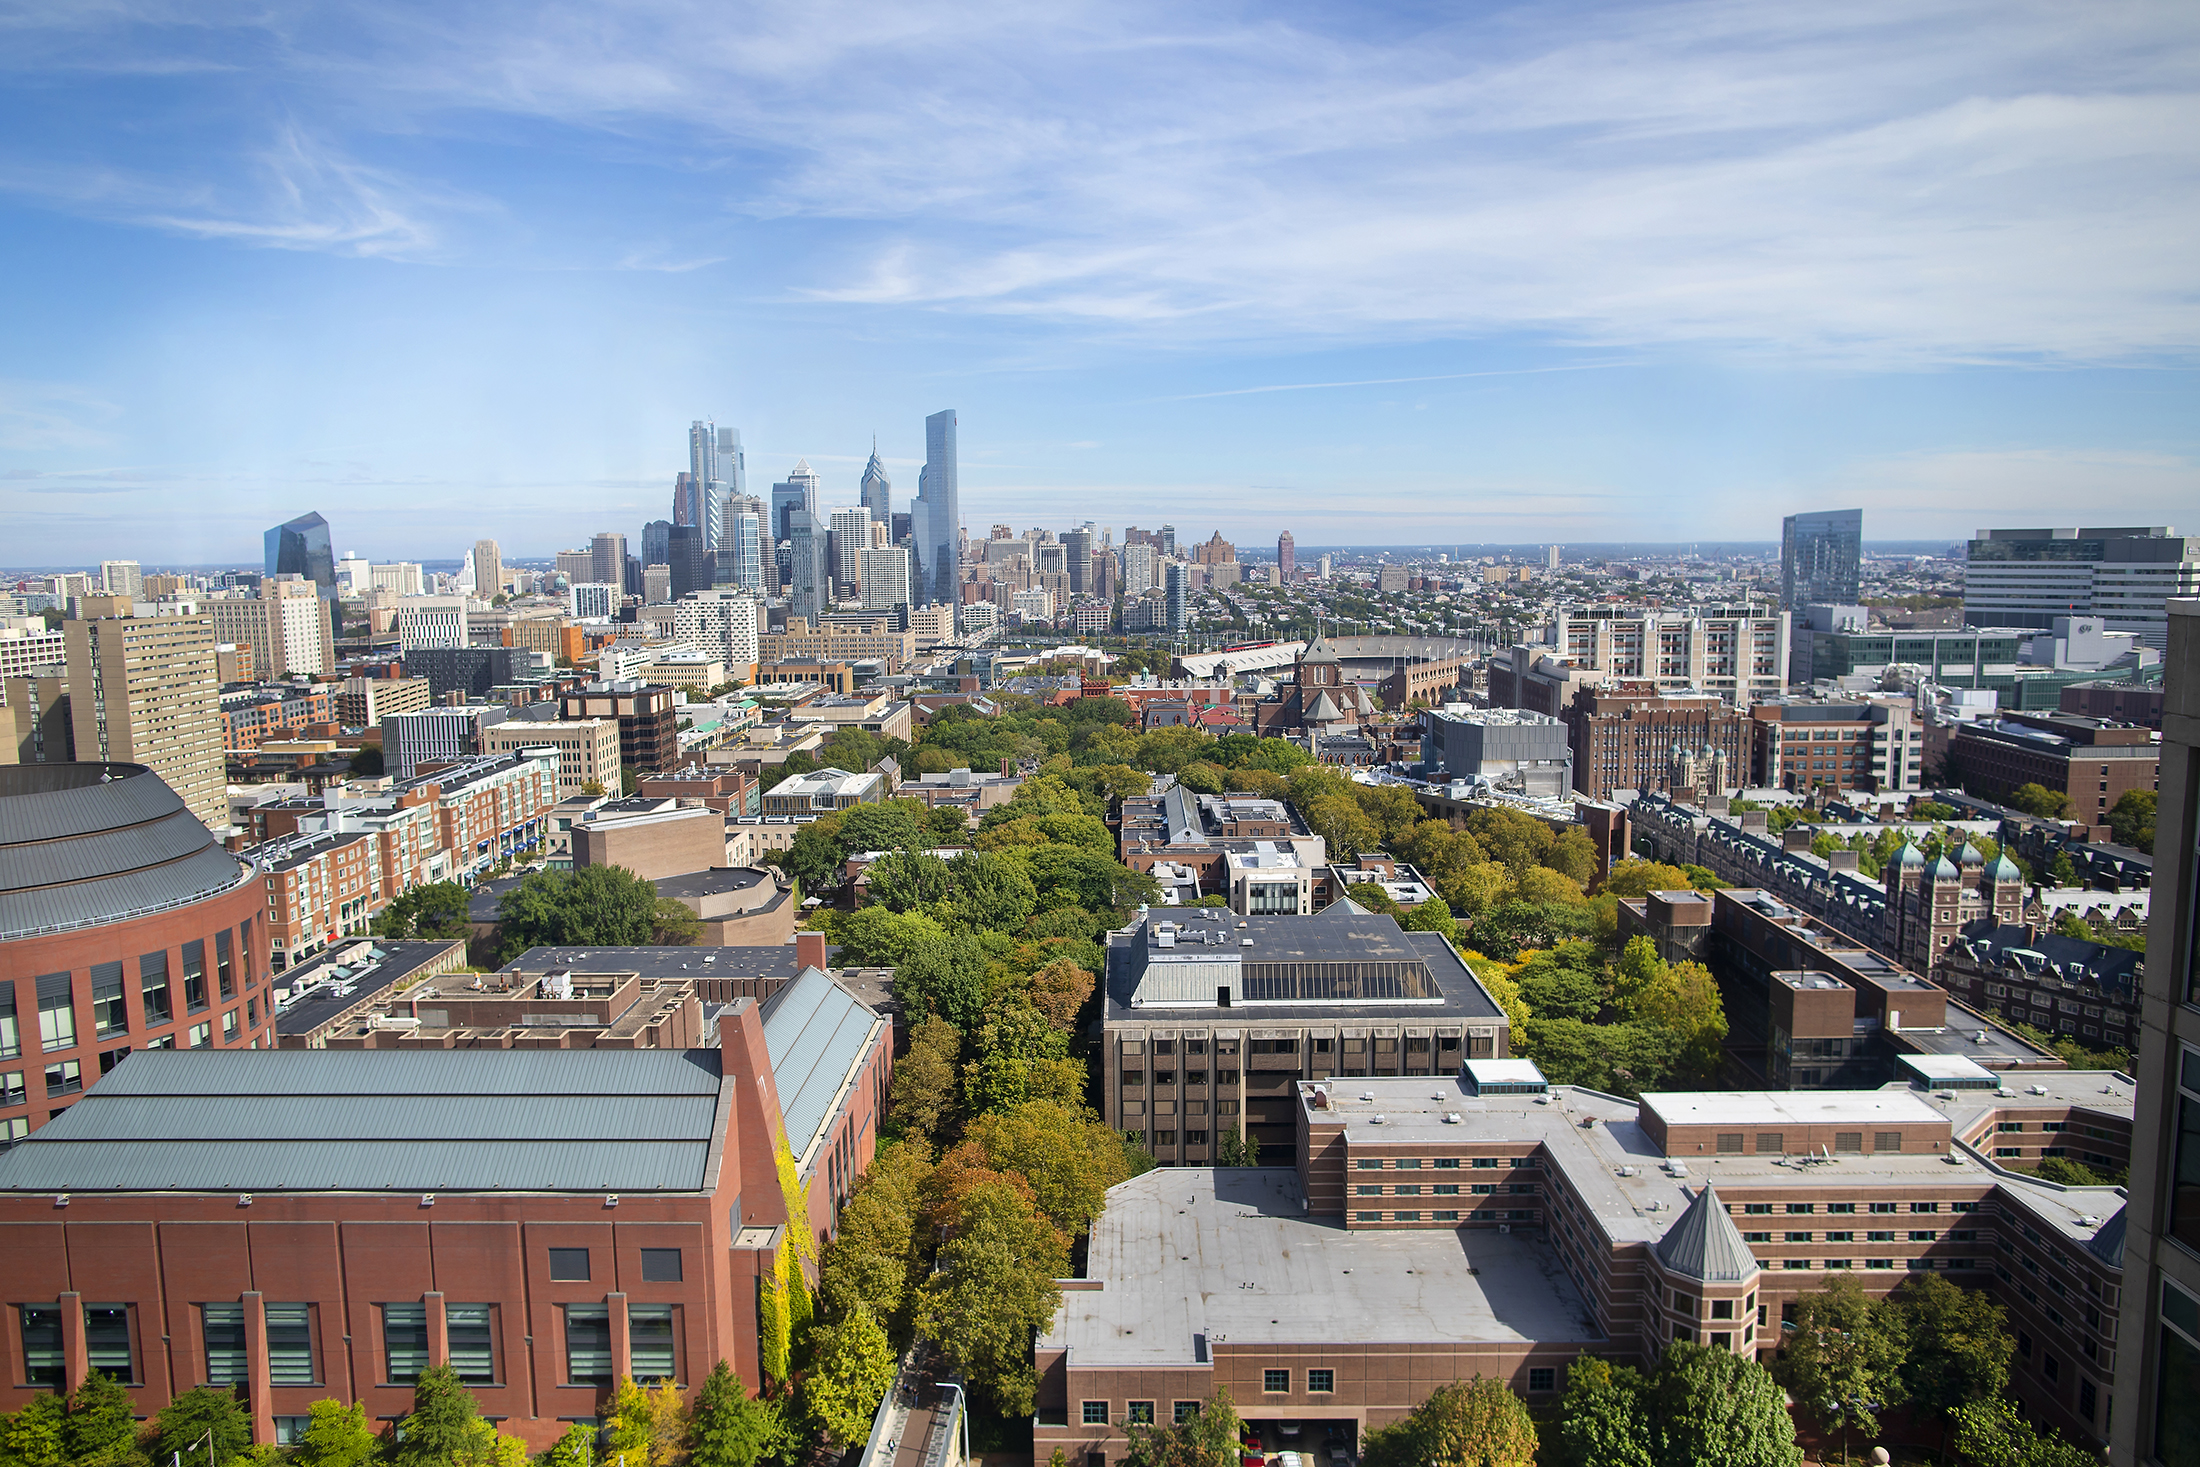 View of Philadelphia skyline from campus